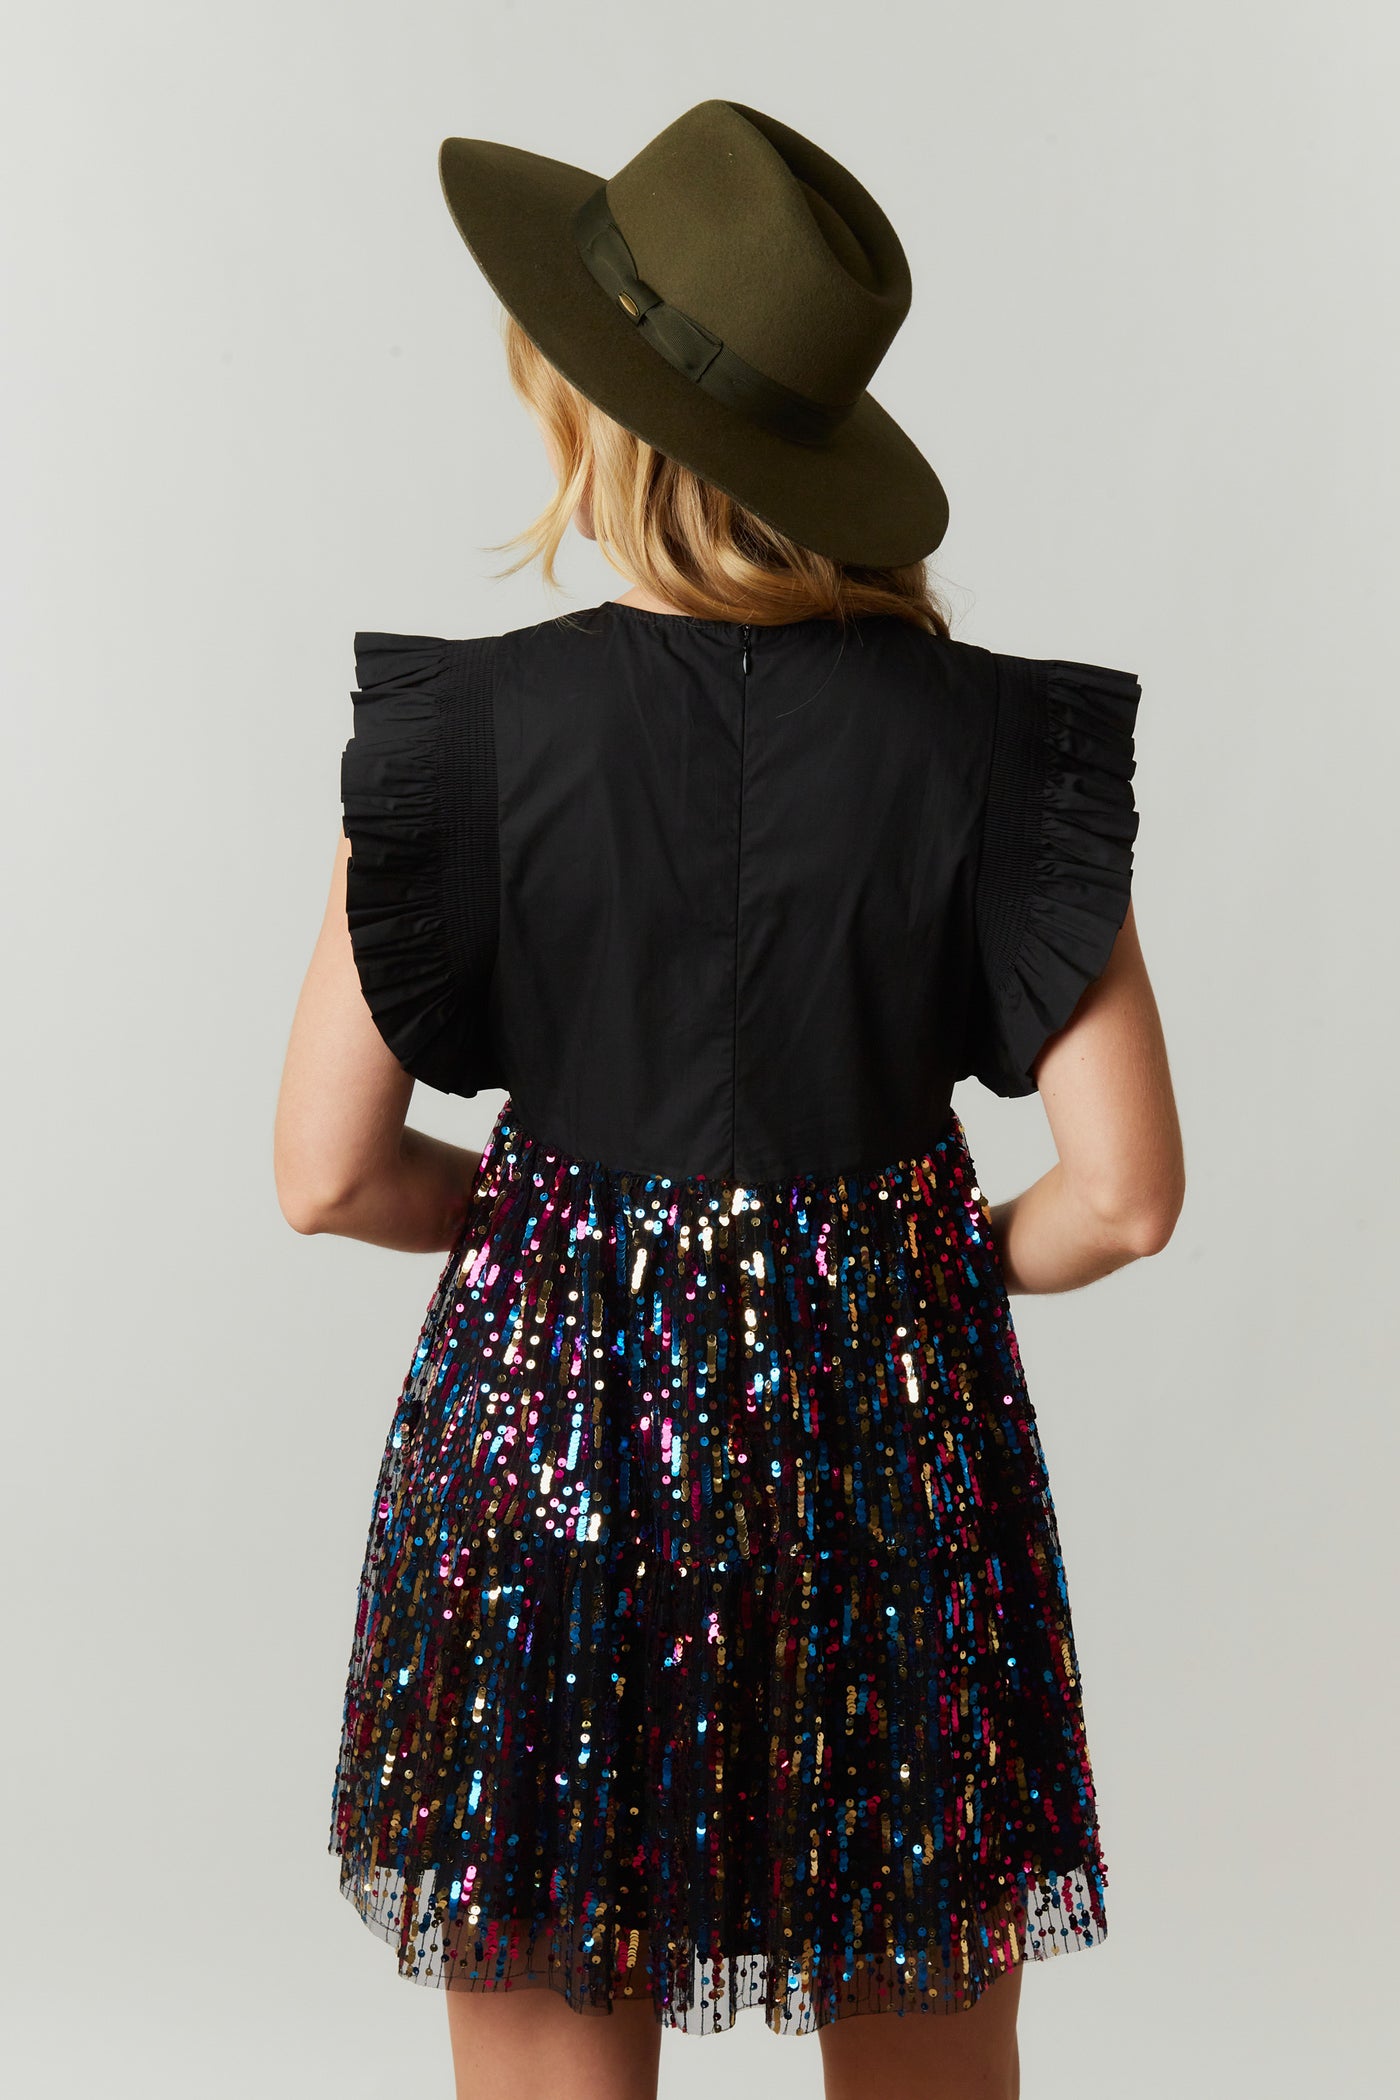 The Janet Dress in Black Rainbow Sequin